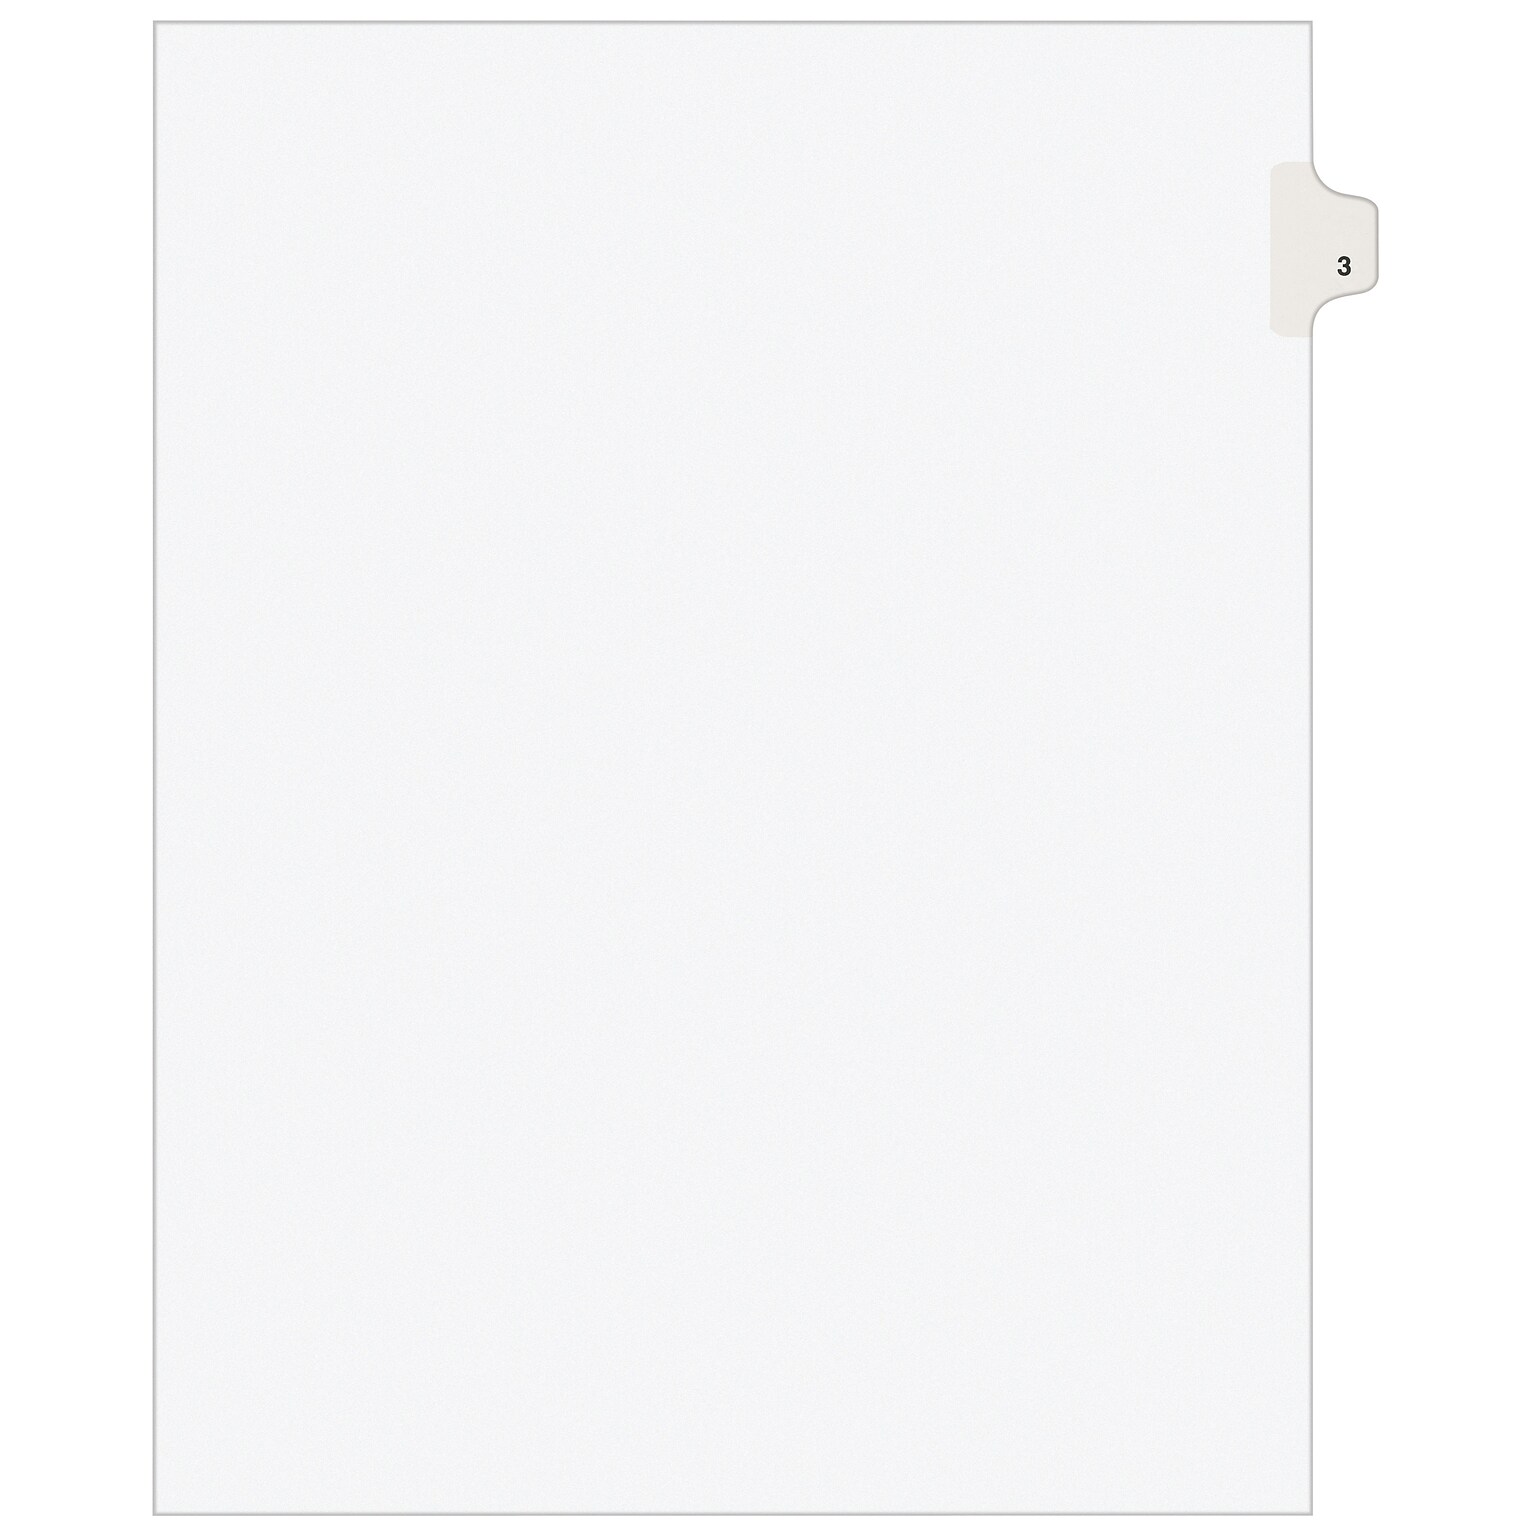 Avery Legal Pre-Printed Paper Dividers, Side Tab #3, White, Avery Style, Letter Size, 25/Pack (11913)